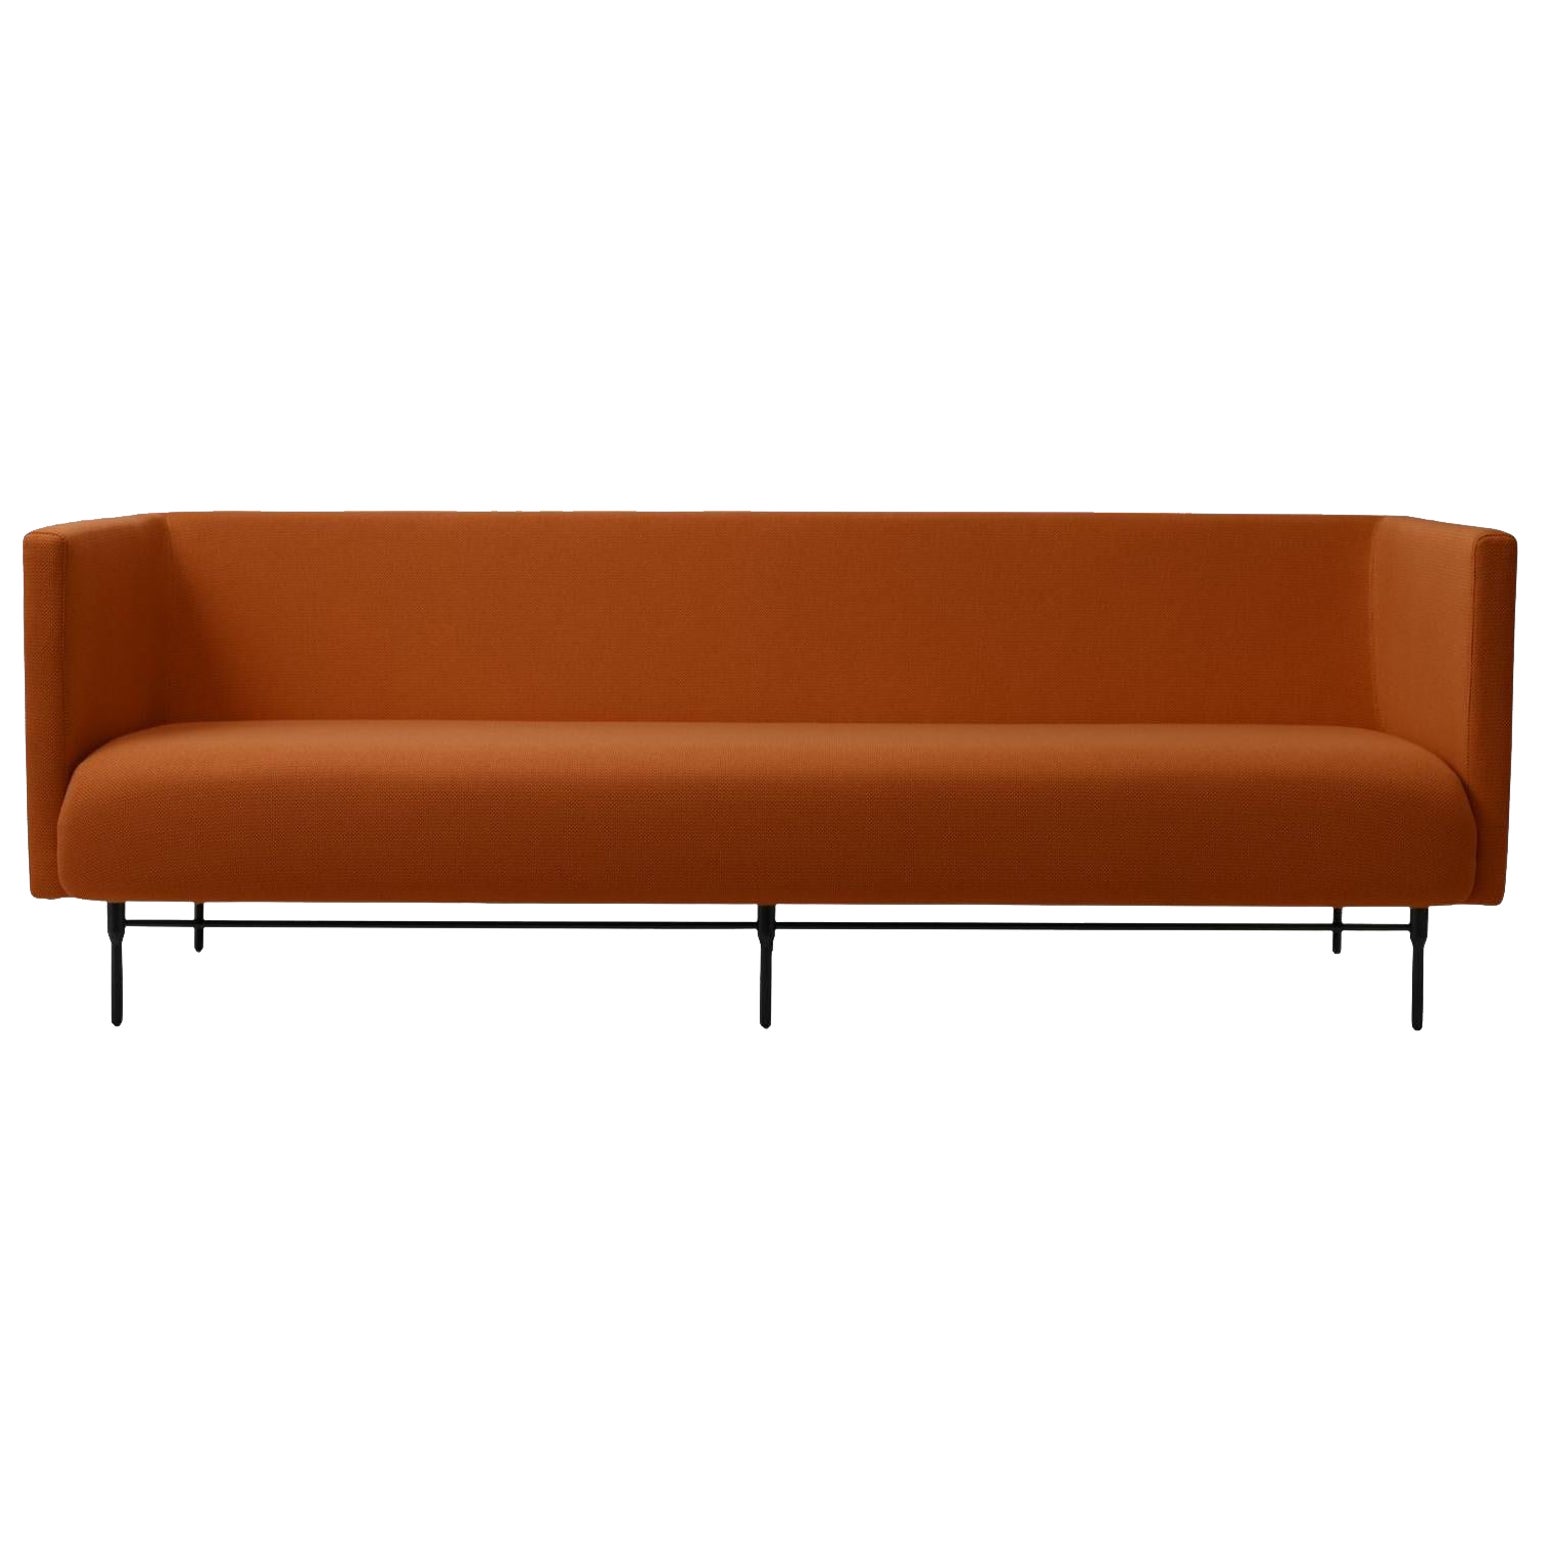 Galore 3 Seater Terracotta by Warm Nordic For Sale